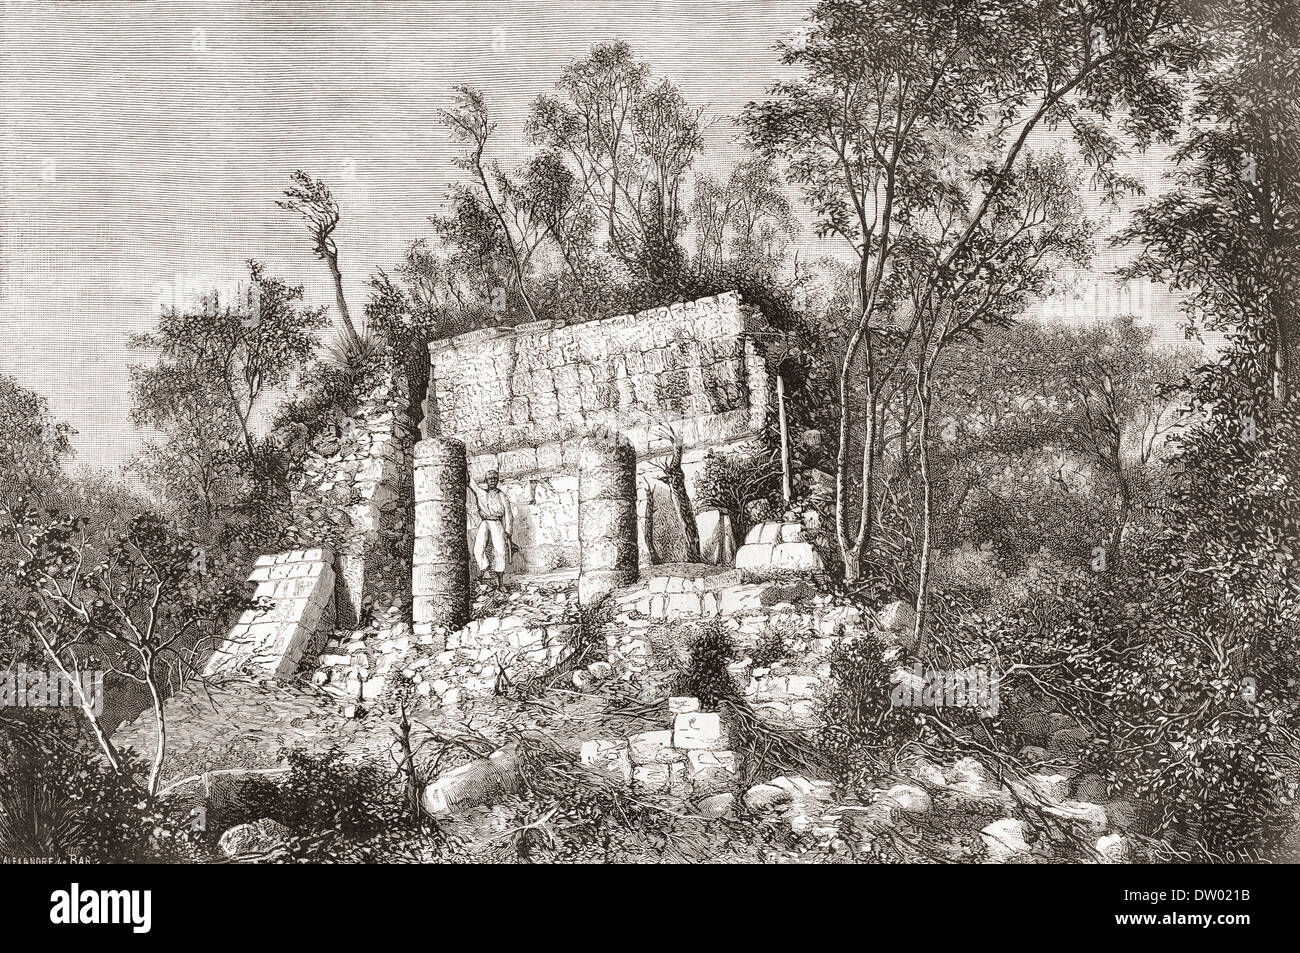 The Ball Court, Chichén Itzá, Yucatan, Mexico in the 19th century before restoration. Stock Photo